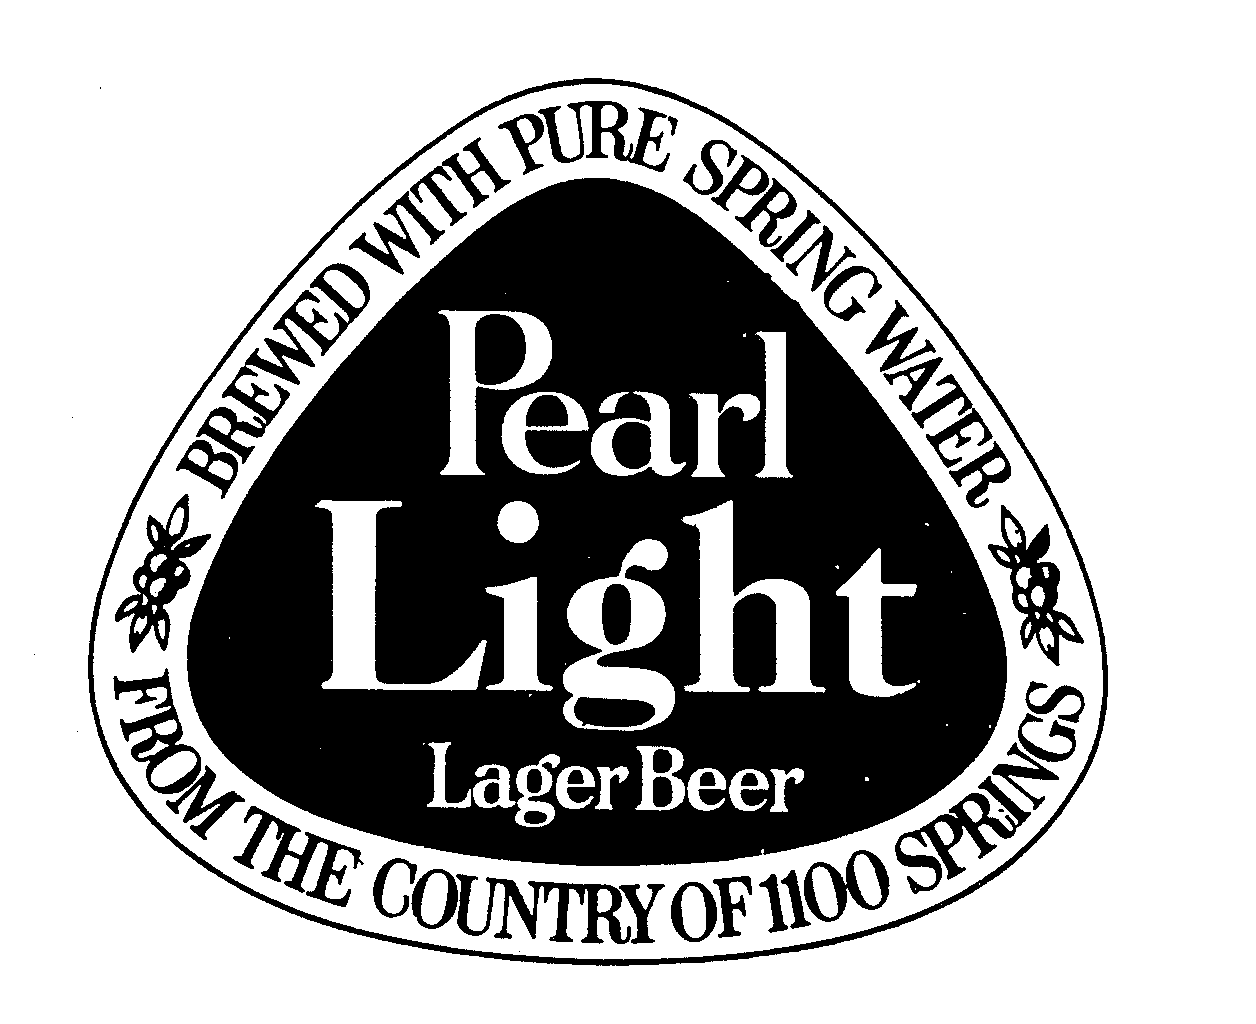  PEARL LIGHT LAGER BEER BREWED WITH PURE SPRING WATER FROM THE COUNTRY OF 1100 SPRINGS